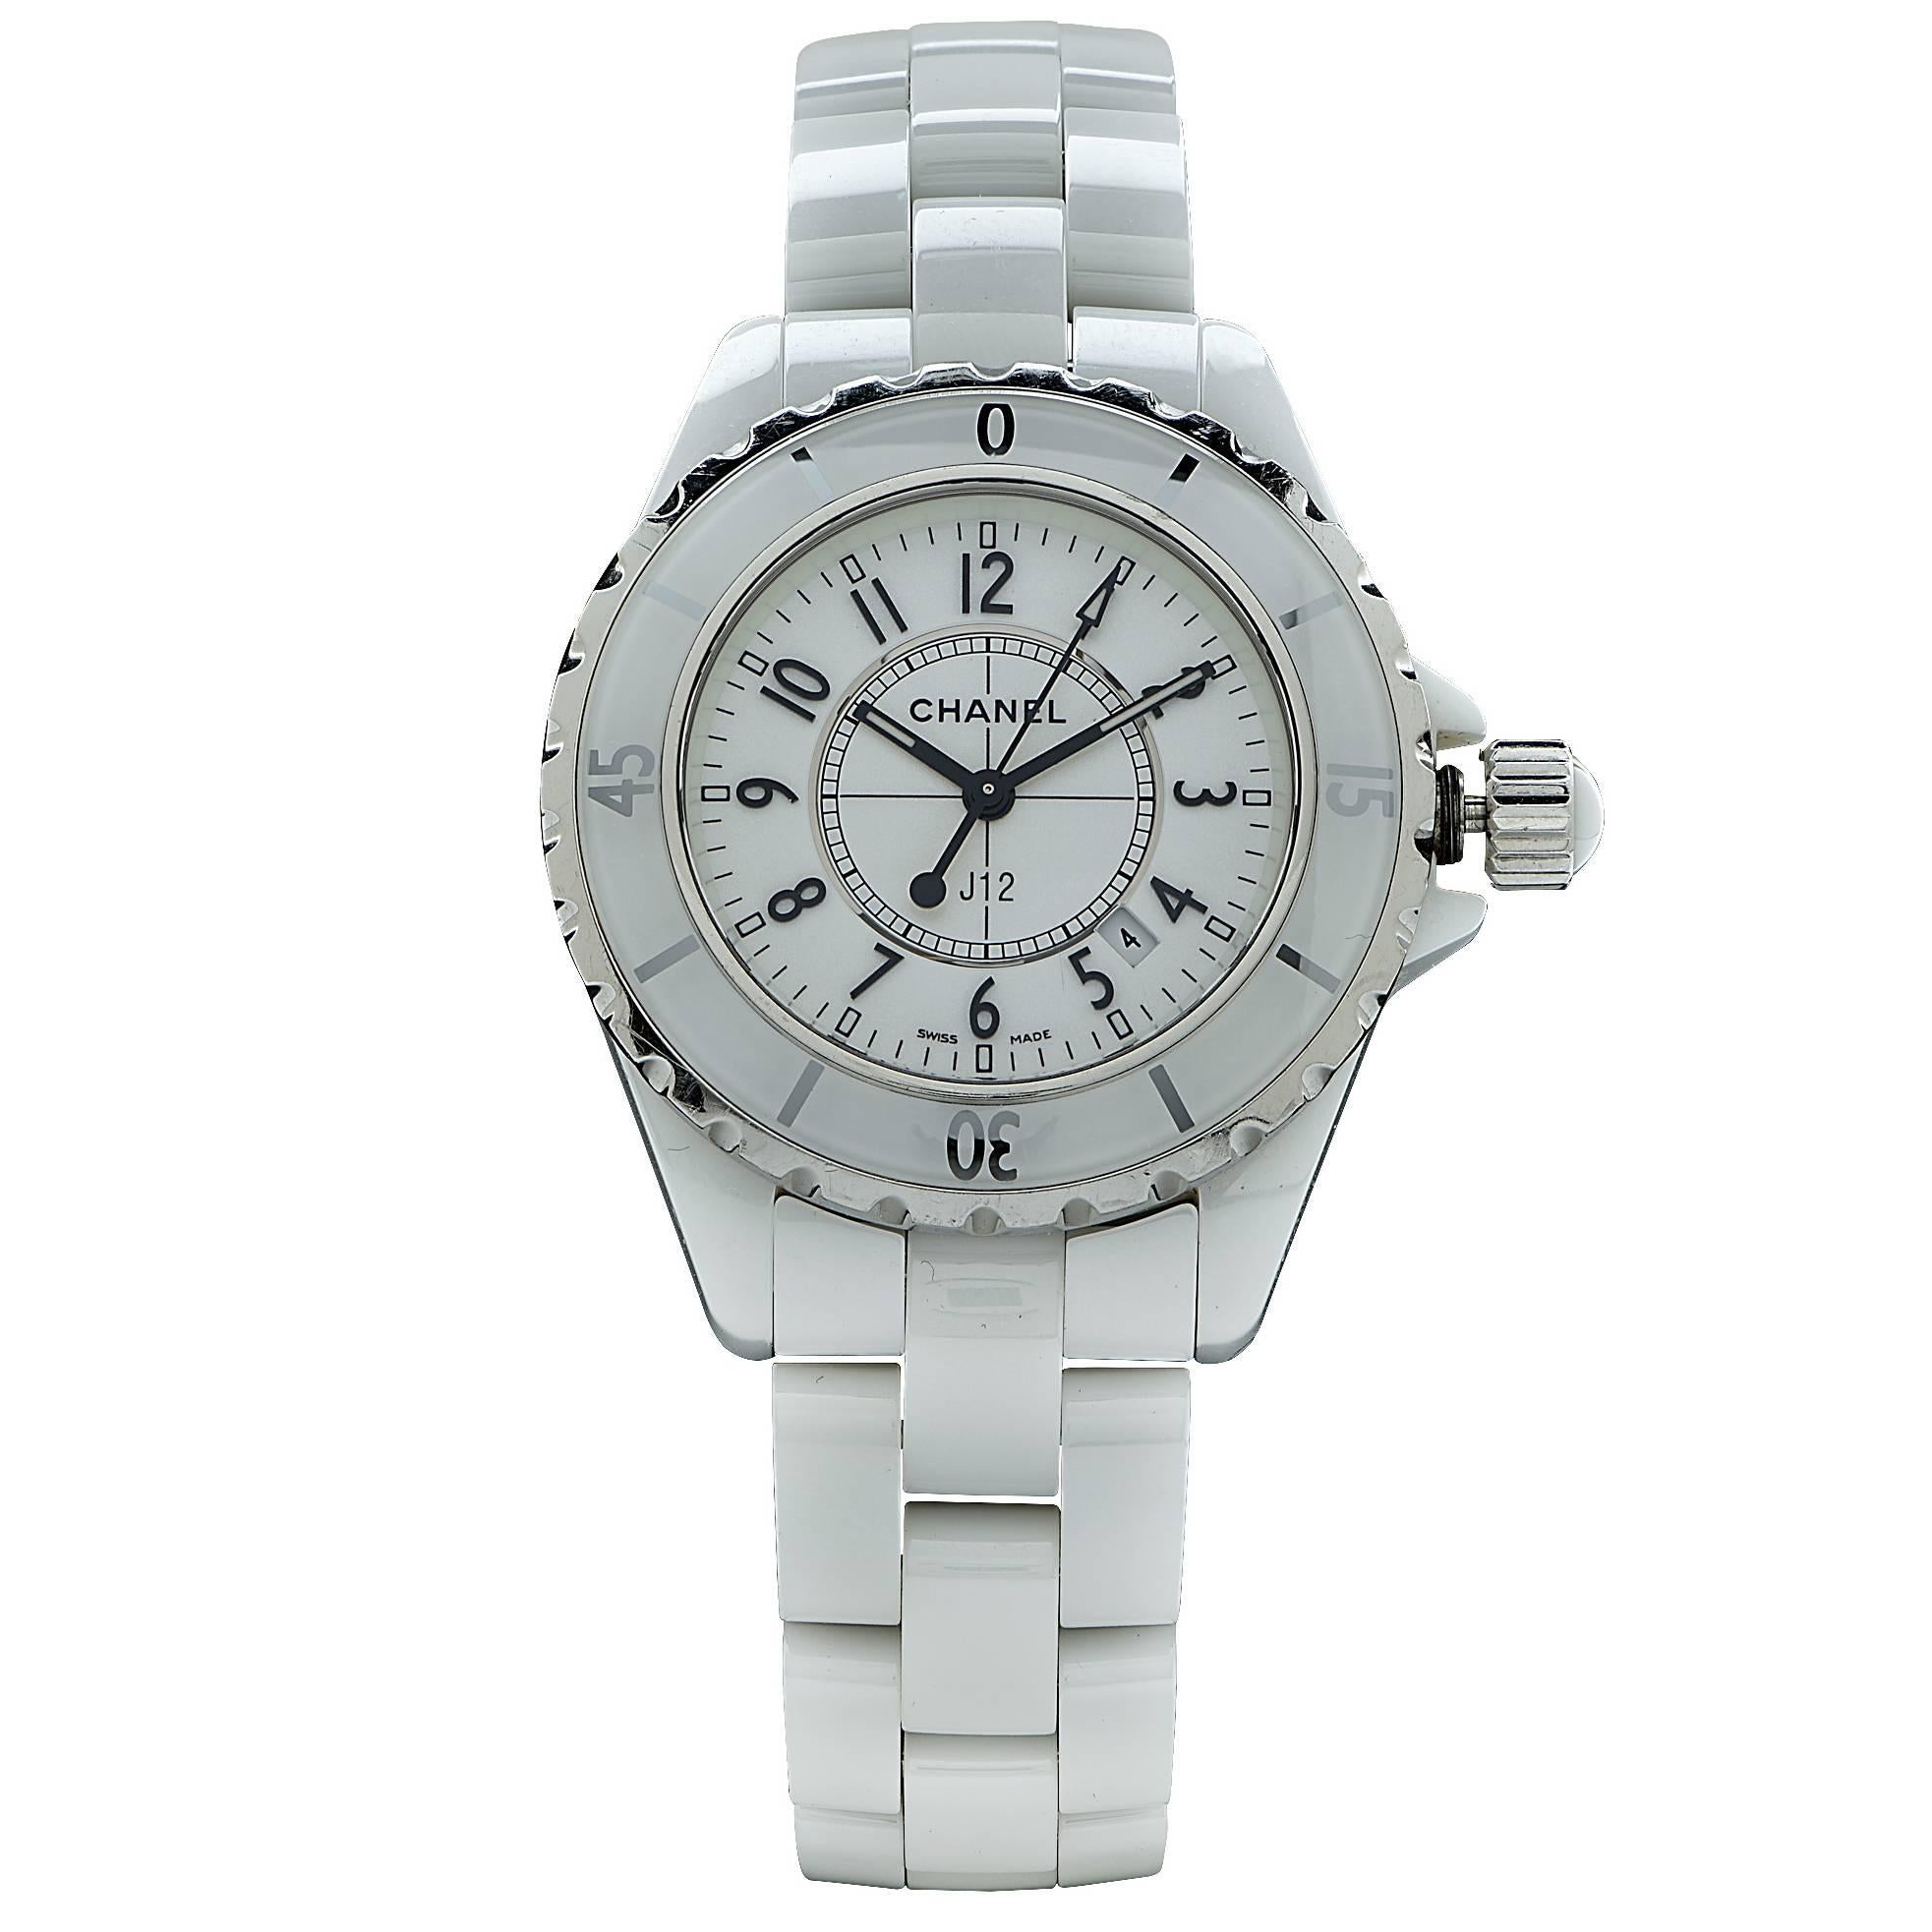 Chanel Stainless Steel White Ceramic Case Automatic Wristwatch